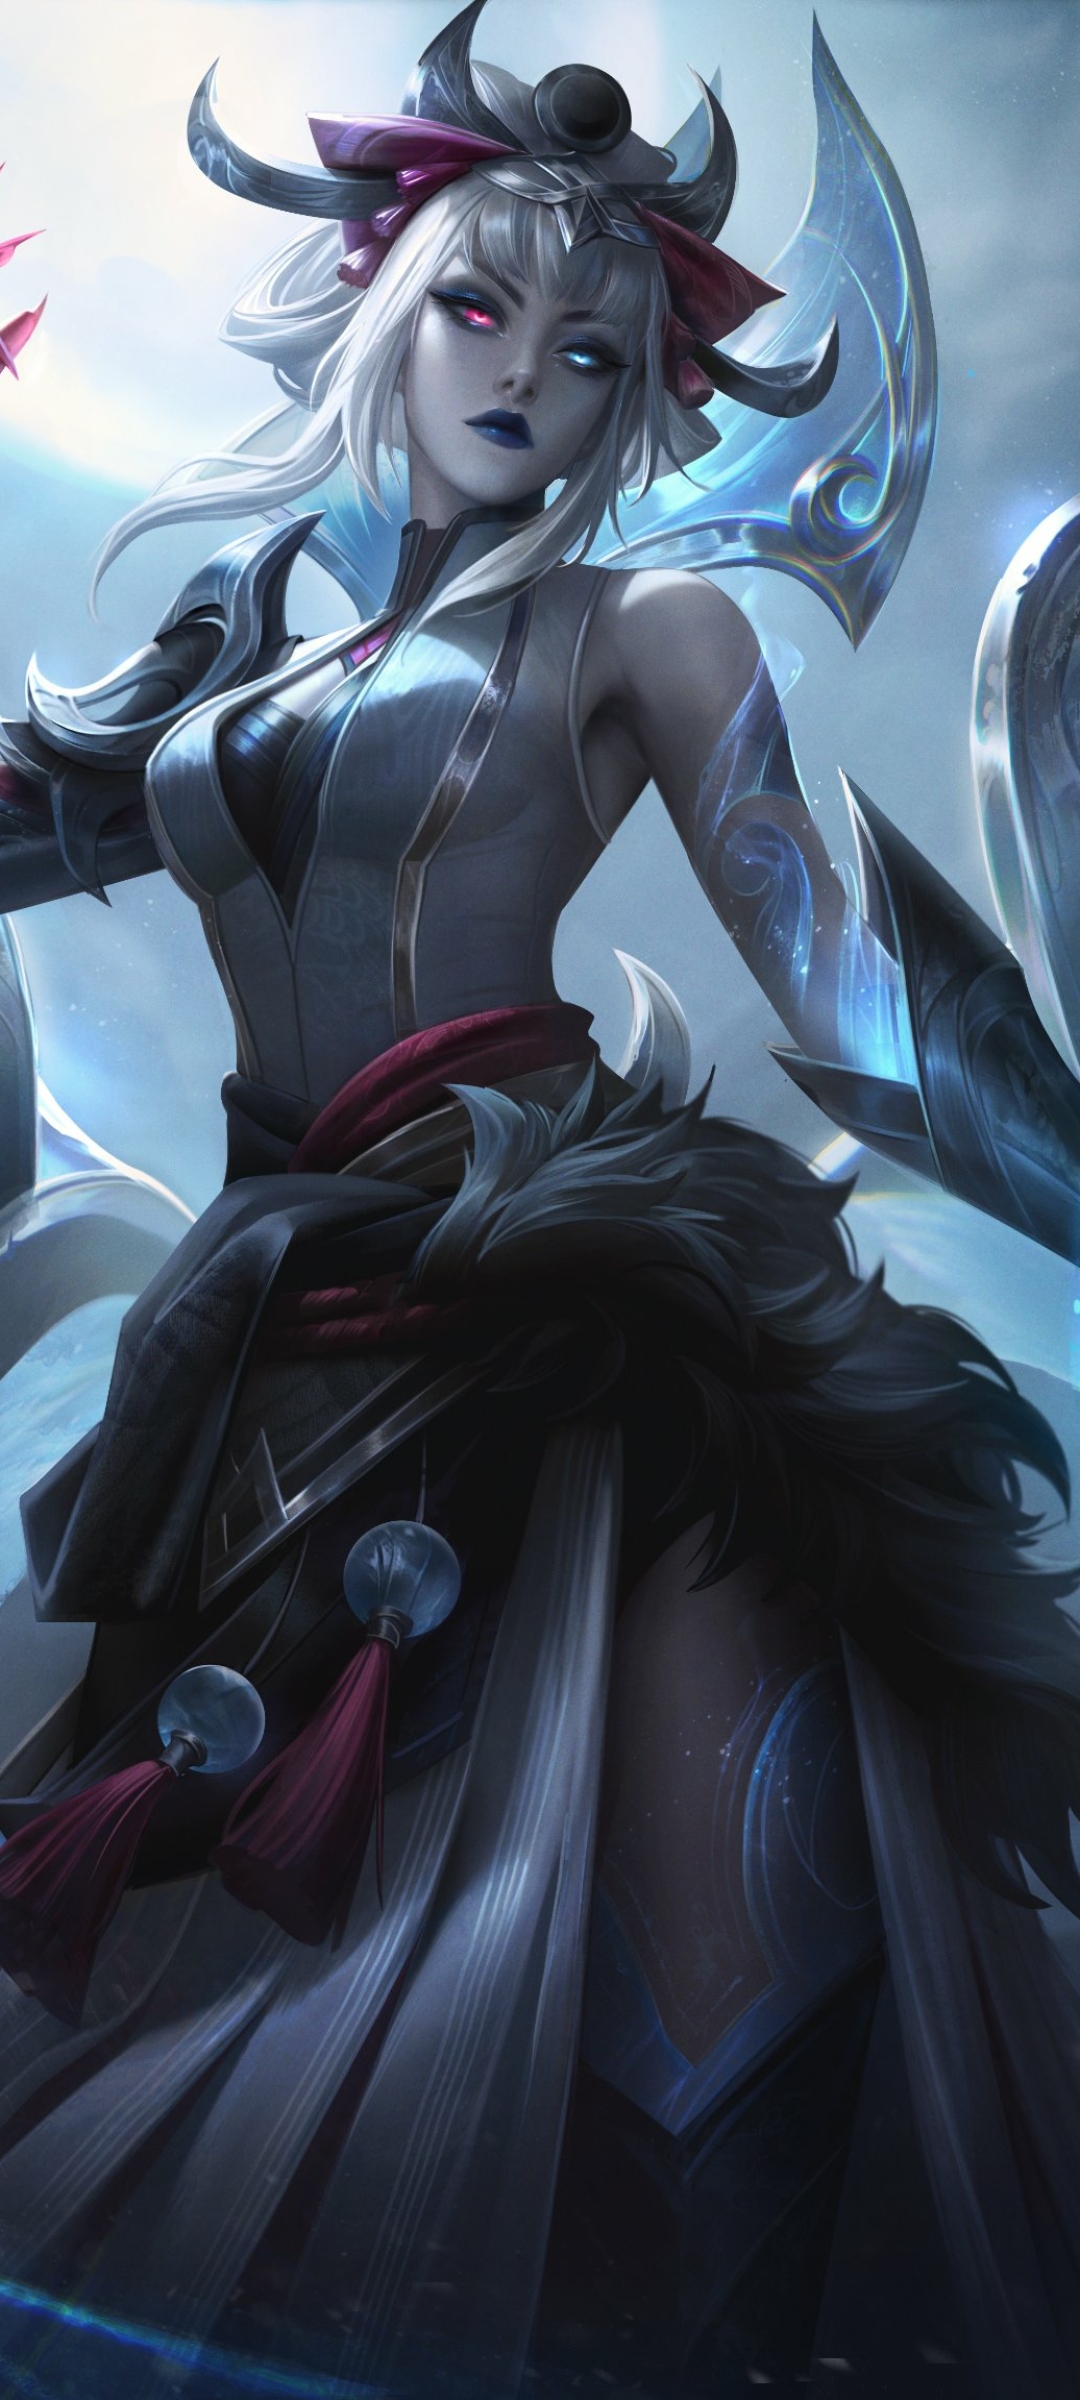 100+] League Of Legends Phone Wallpapers